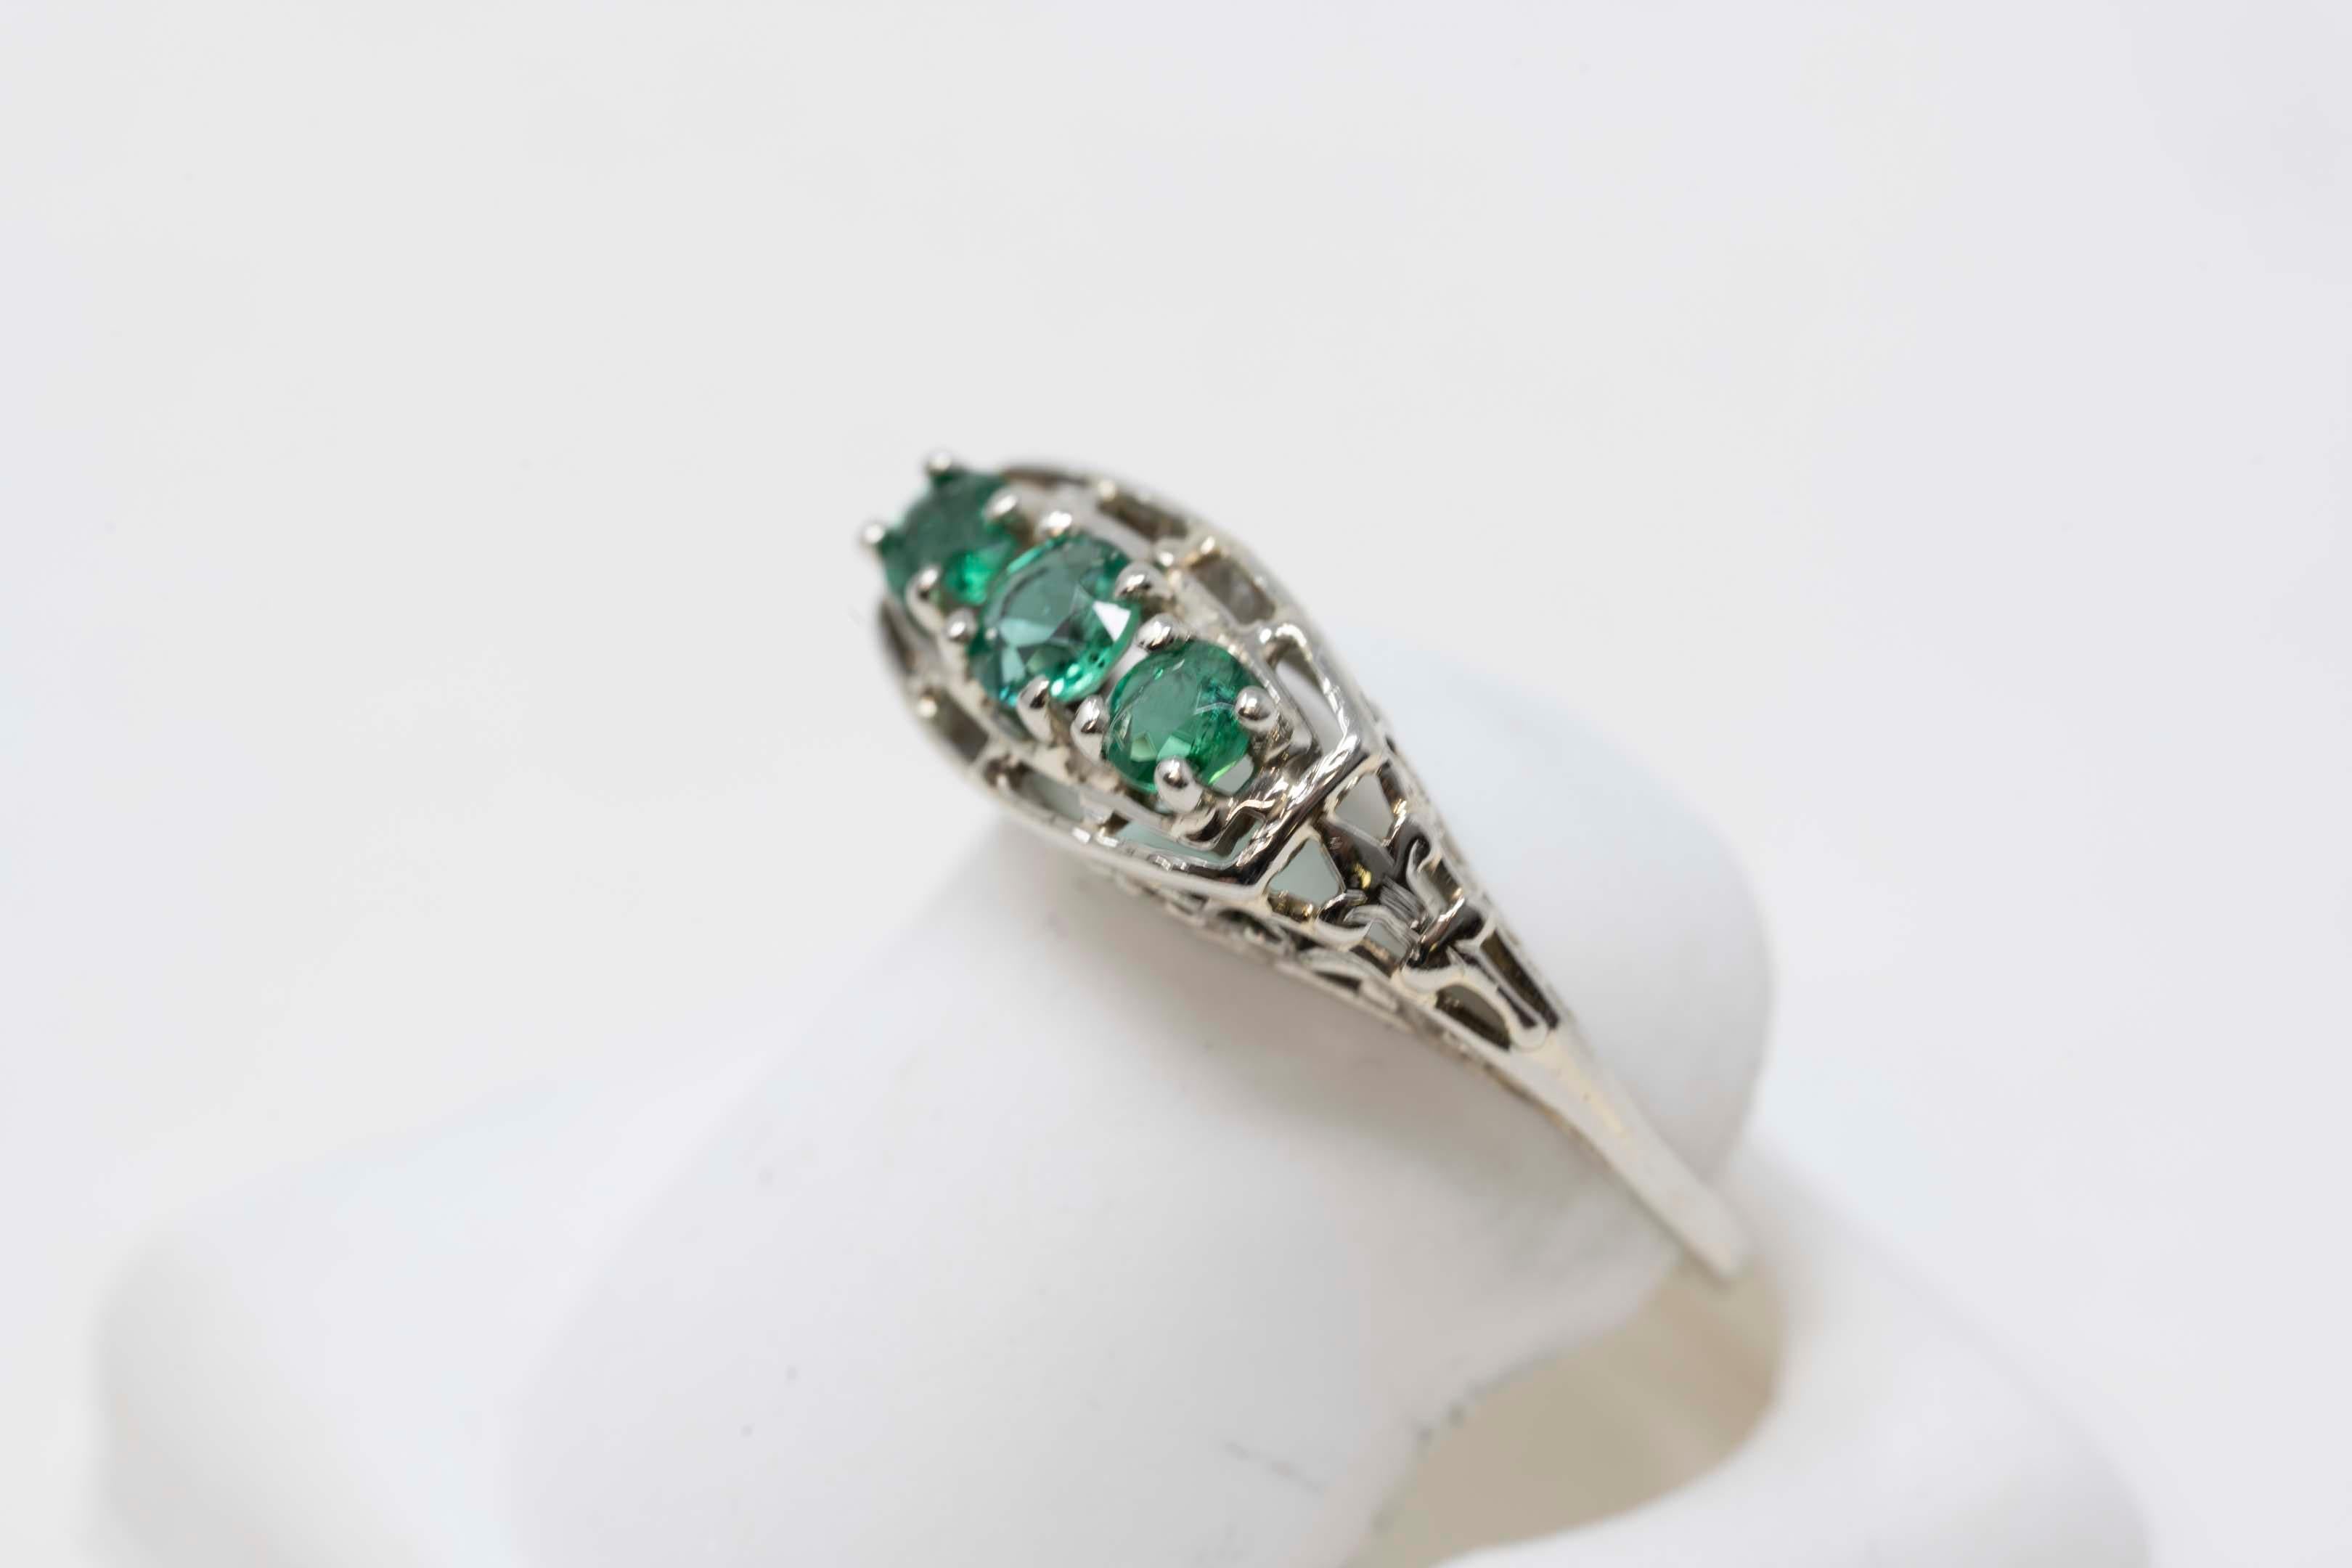 Victorian 18k white gold and emerald gemstones ladies ring, size 7 3/4. The emerald measures from 3.2mm to 4mm, stamped on the inside. Made in Canada, maker unknown, early 1900.
